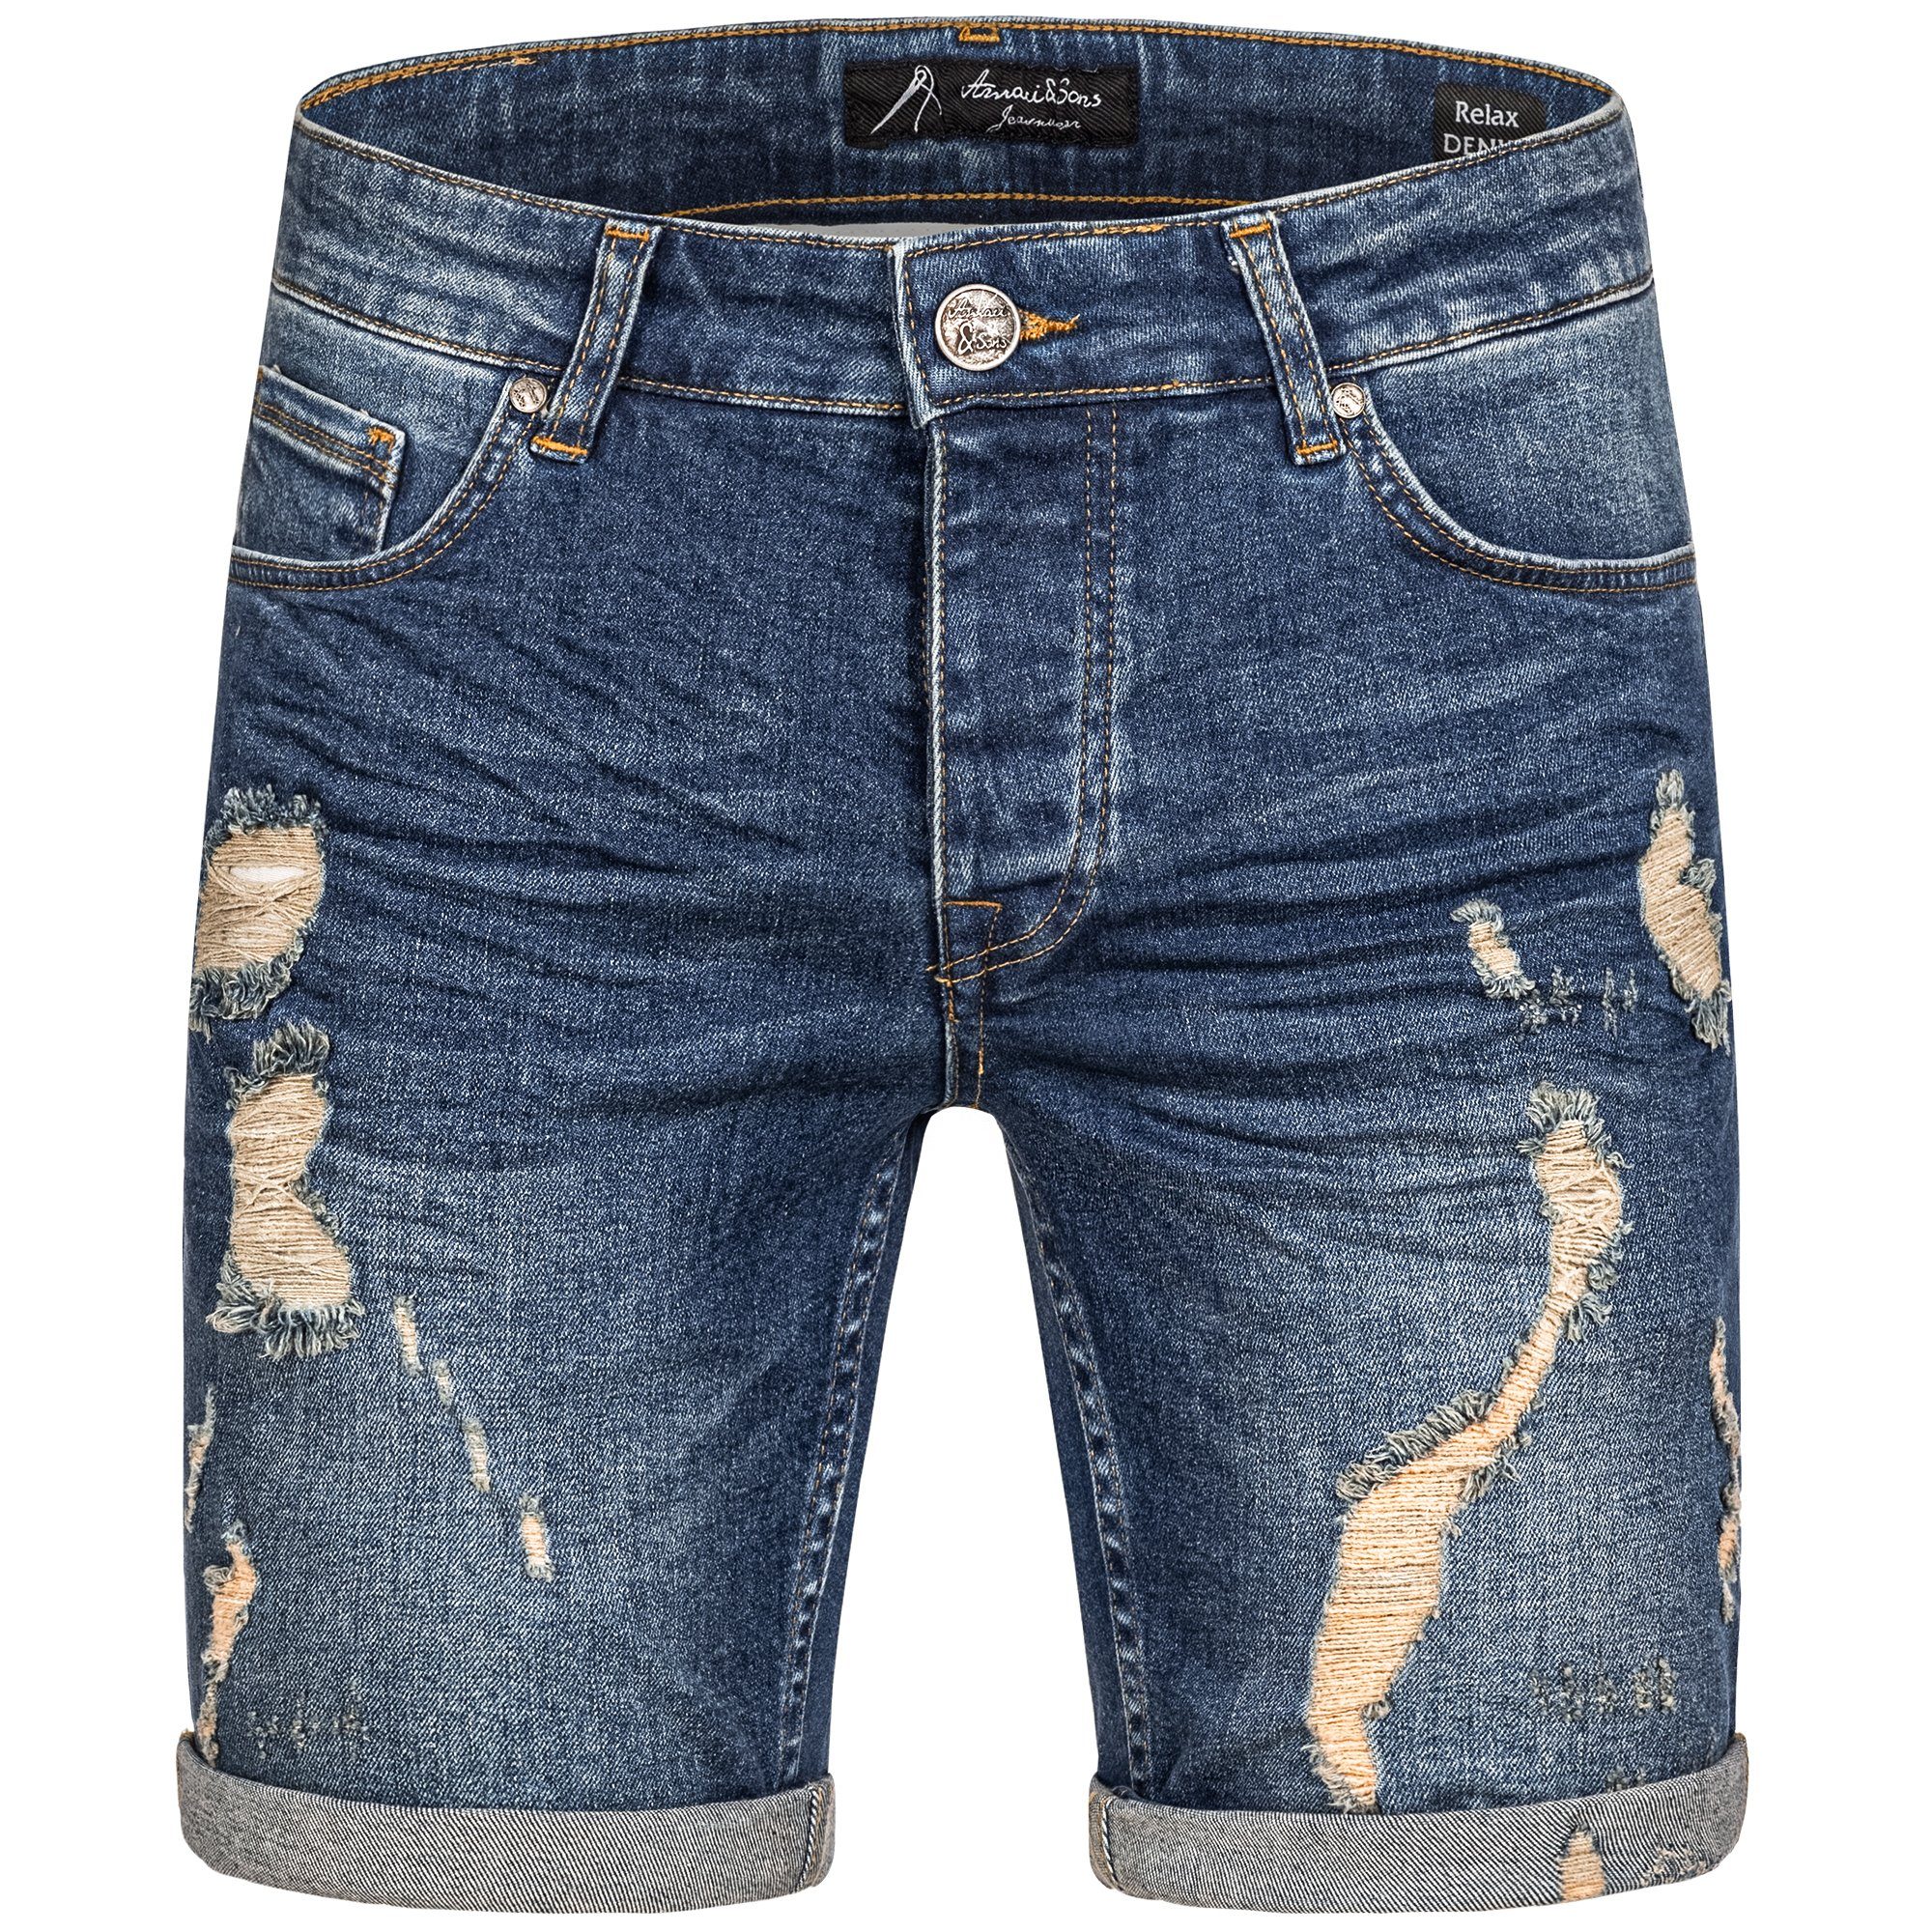 Amaci&Sons Jeansshorts SAN DIEGO Destroyed Jeans Shorts